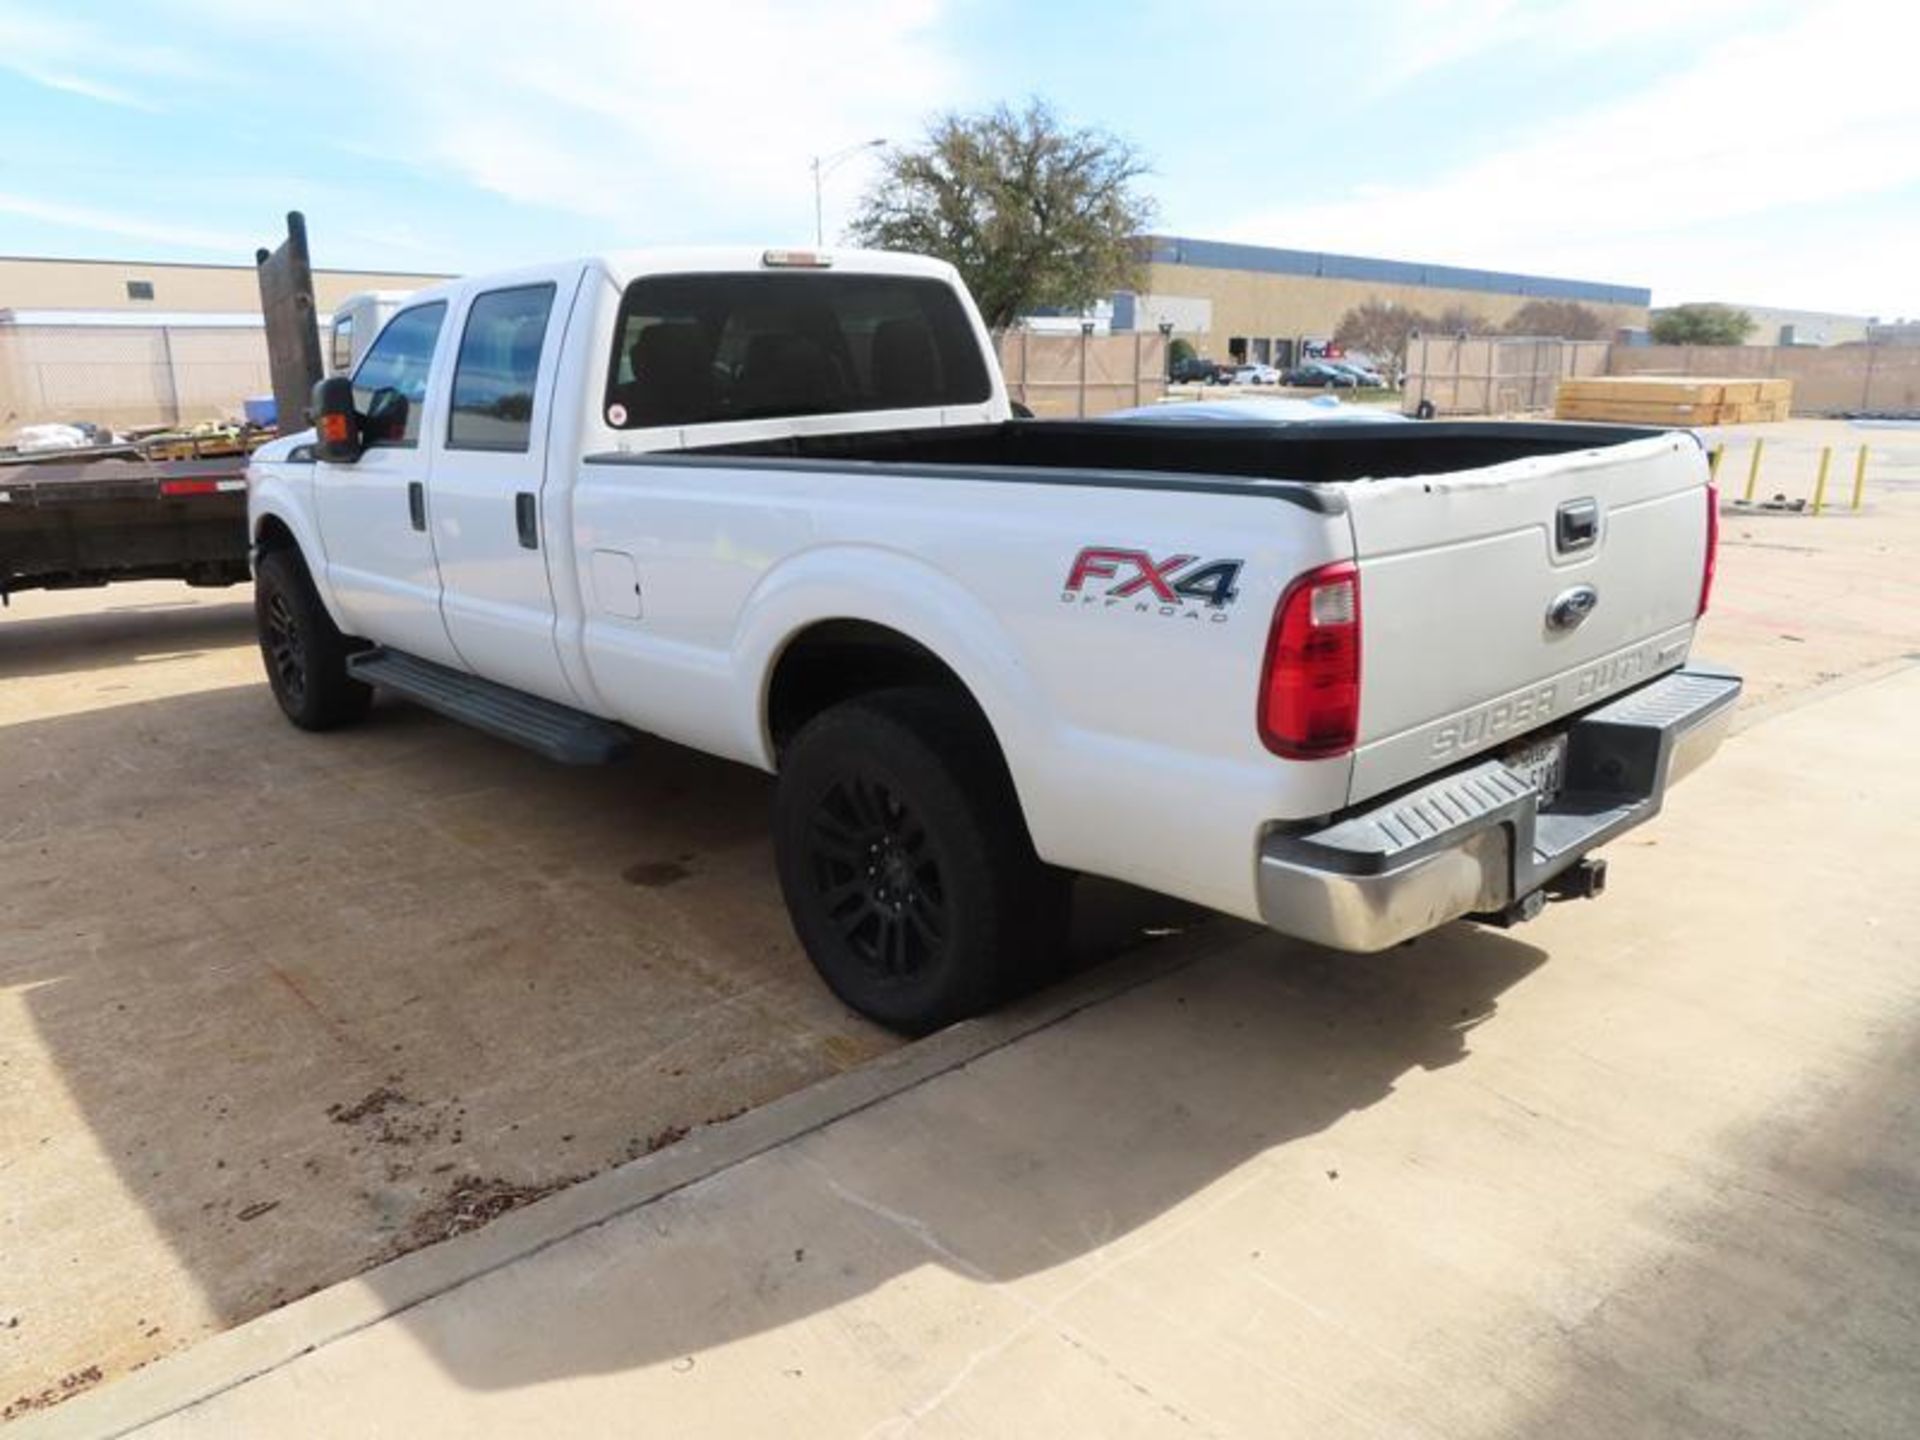 2014 Ford F-250 Xl Super Duty 8' Pickup Truck - Image 7 of 20